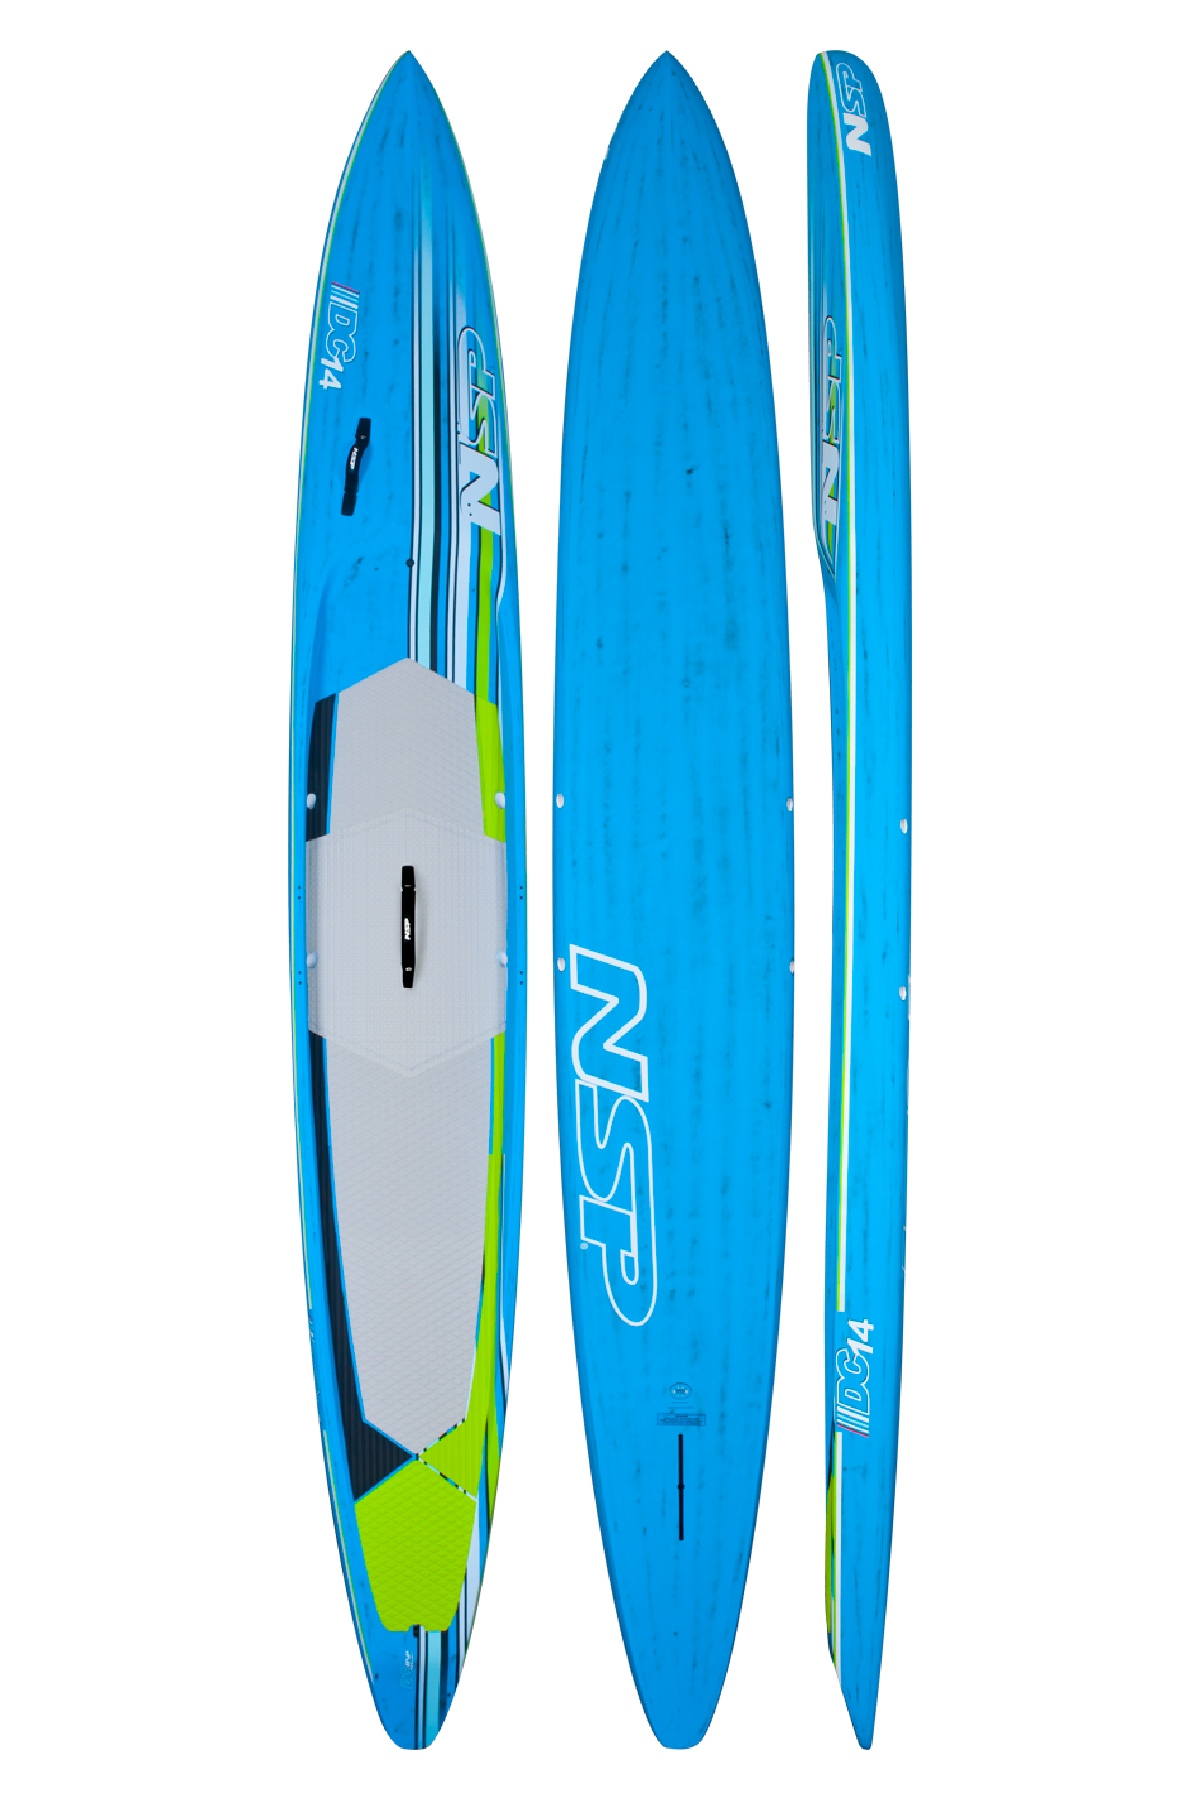 14' NSP SUP FLATWATER RACE - DC PRO CARBONO - 23"